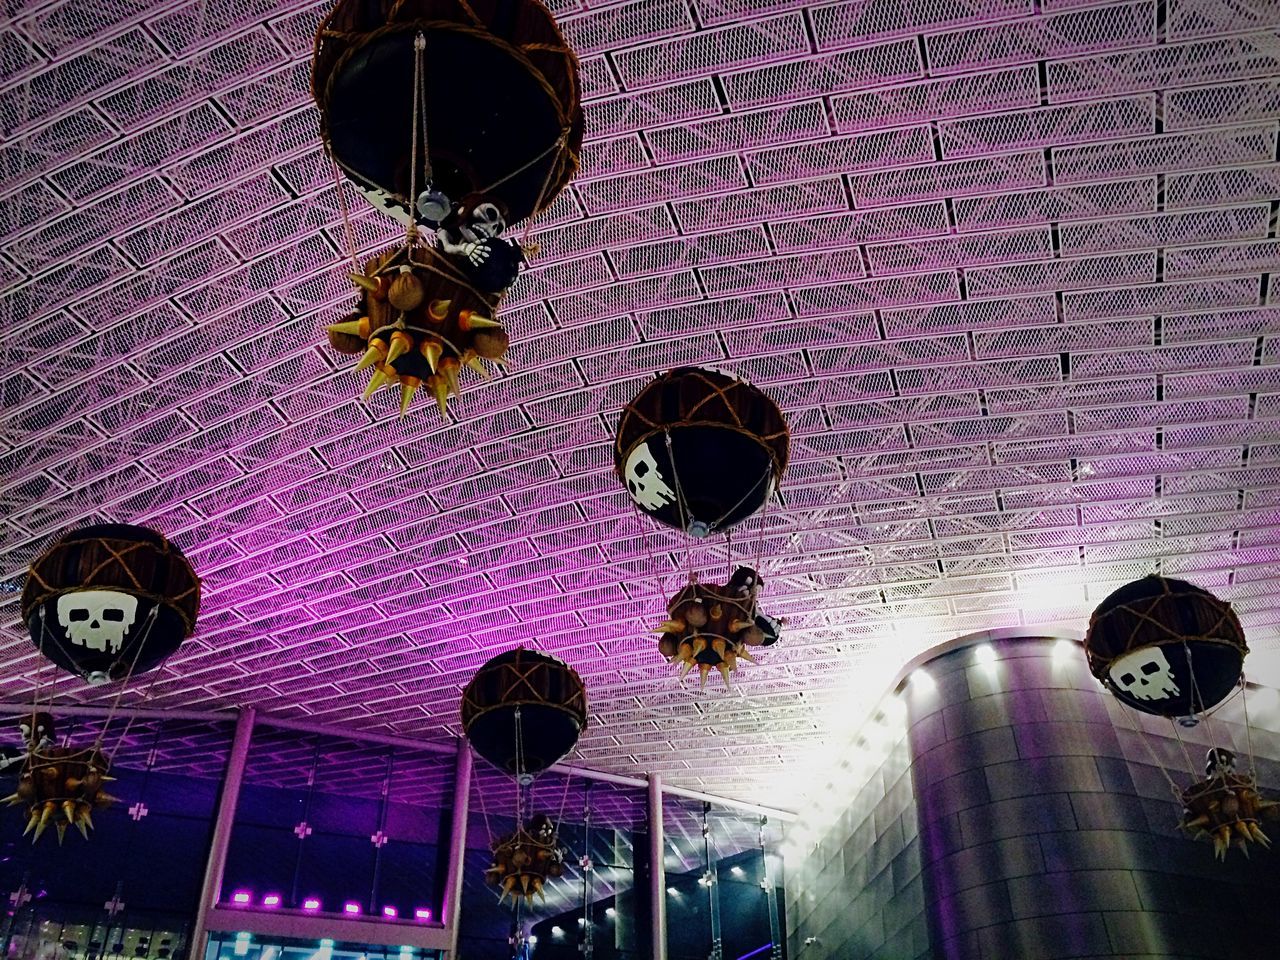 low angle view, lighting equipment, illuminated, hanging, built structure, architecture, decoration, building exterior, ceiling, night, lantern, no people, multi colored, electric lamp, pattern, electric light, decor, indoors, celebration